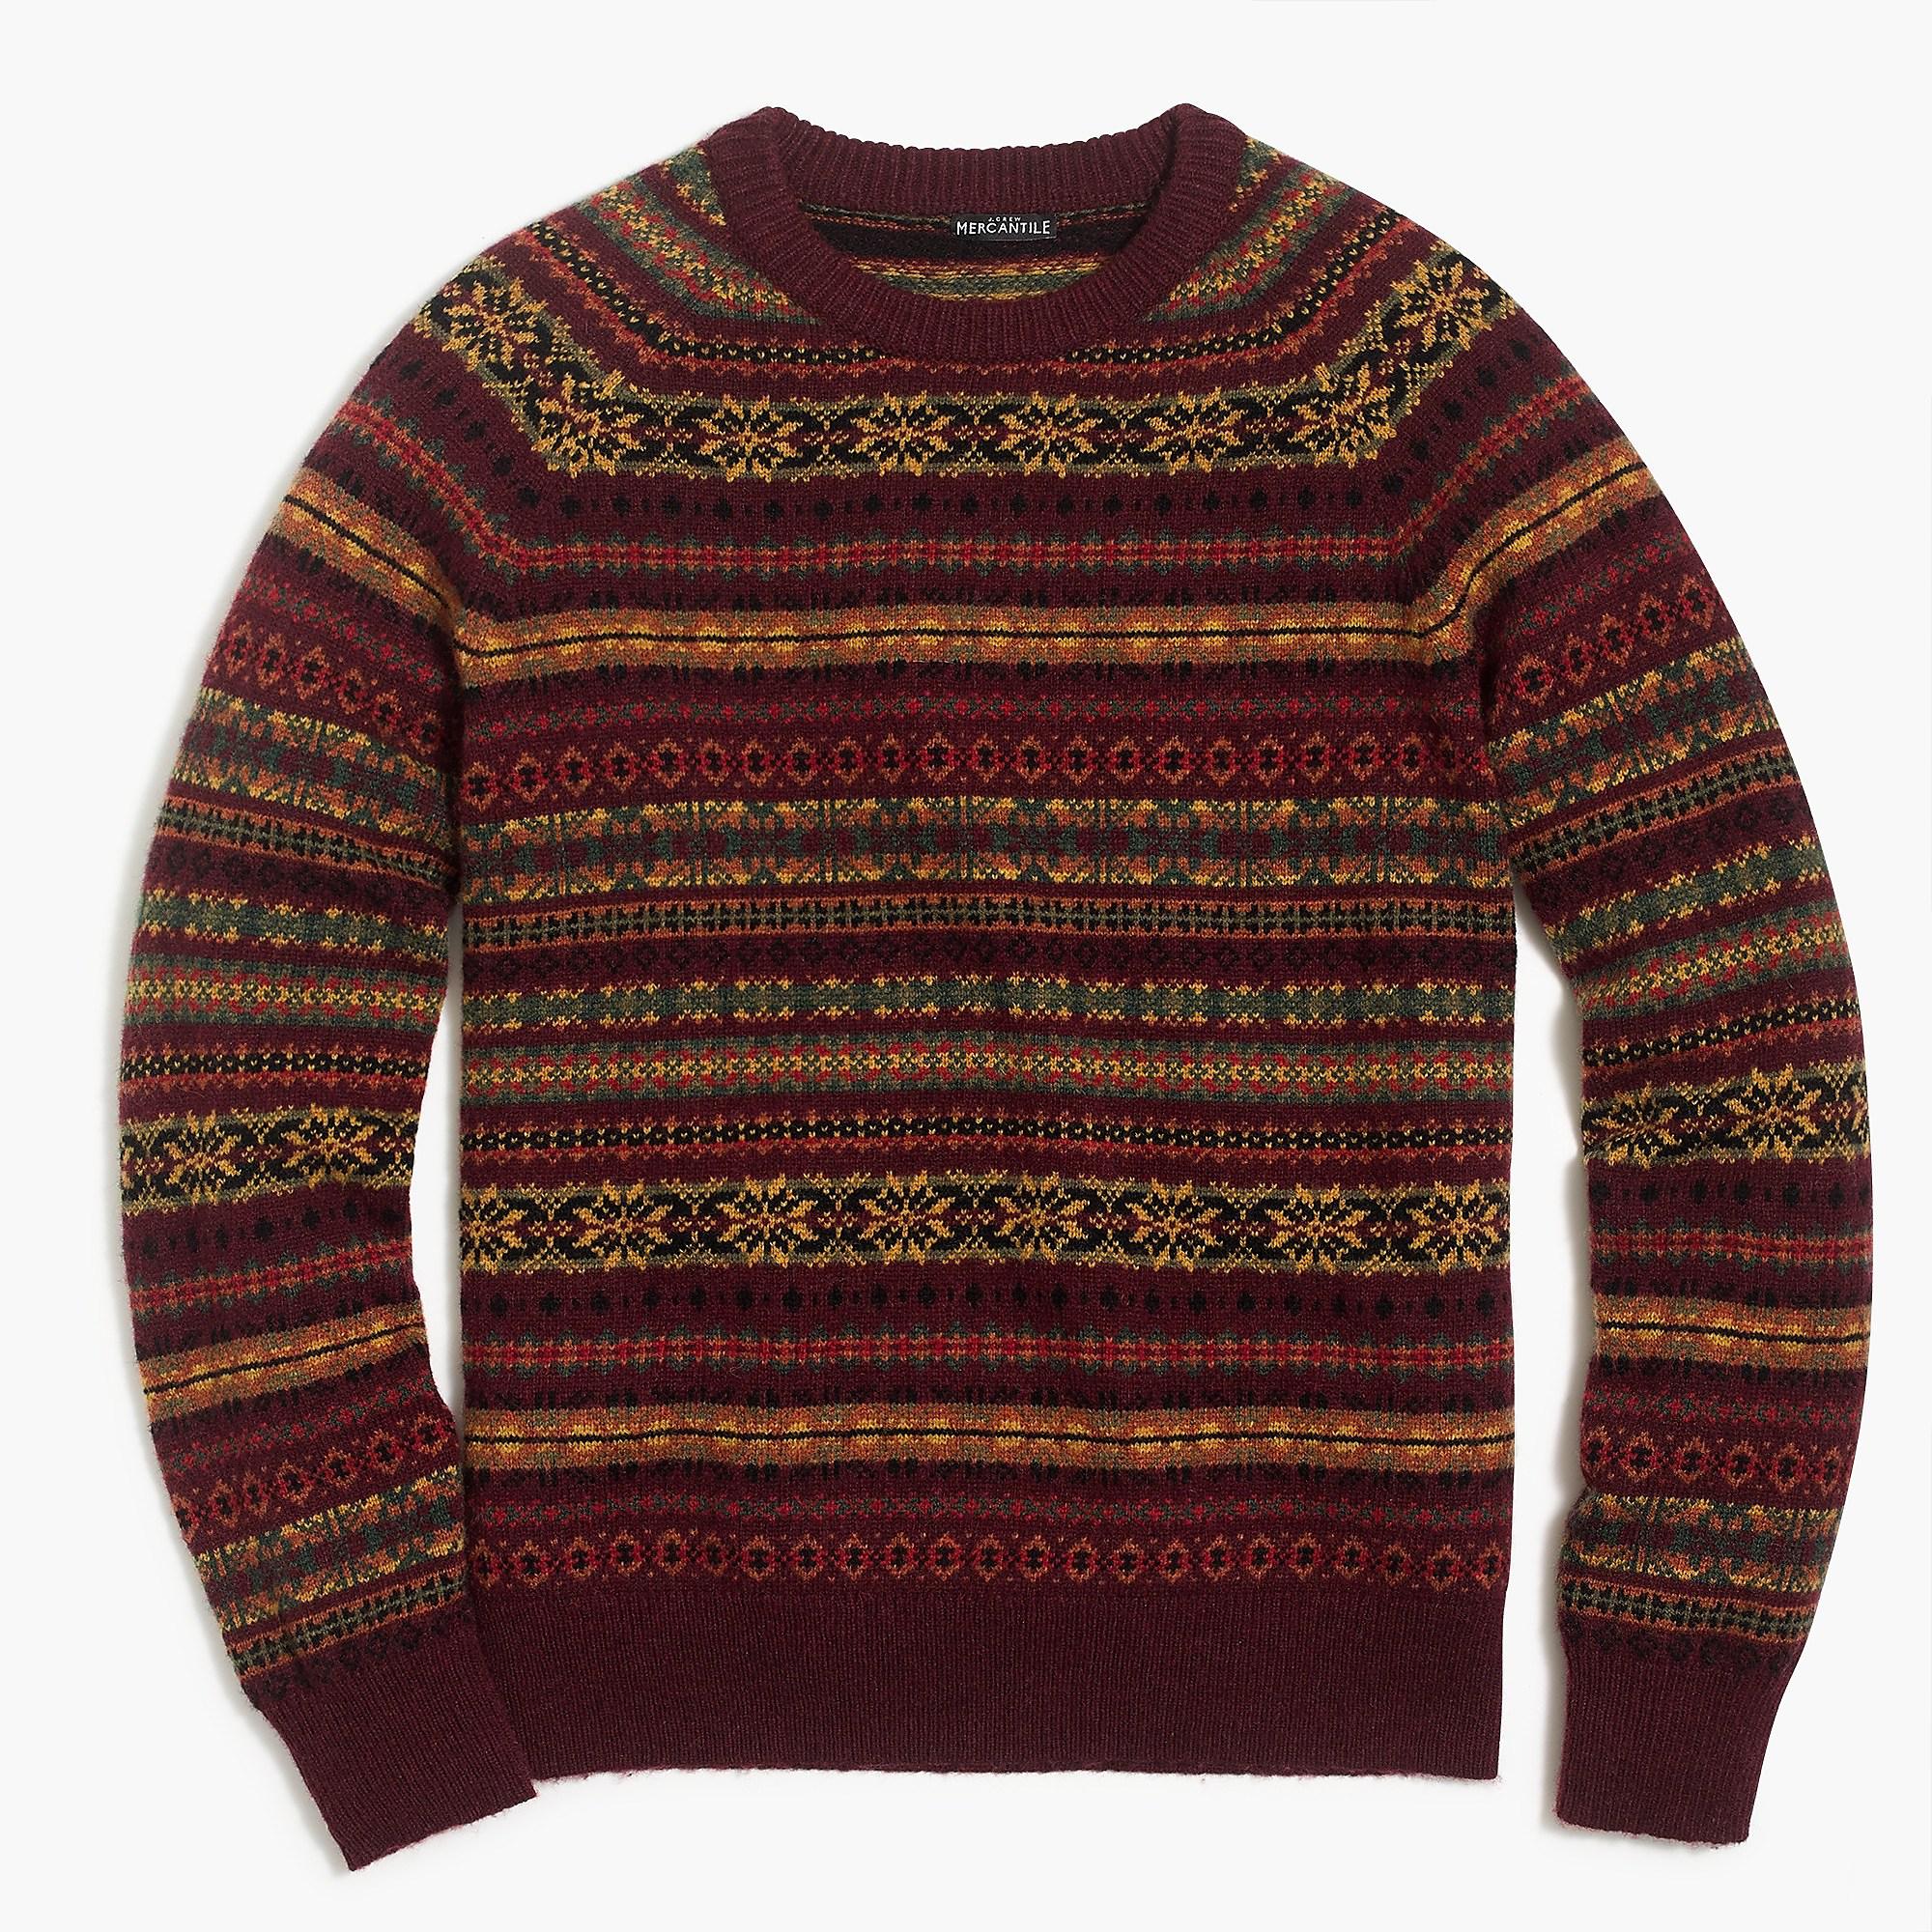 Lyst - J.Crew Fair Isle Crewneck Sweater In Supersoft Wool Blend in Red ...